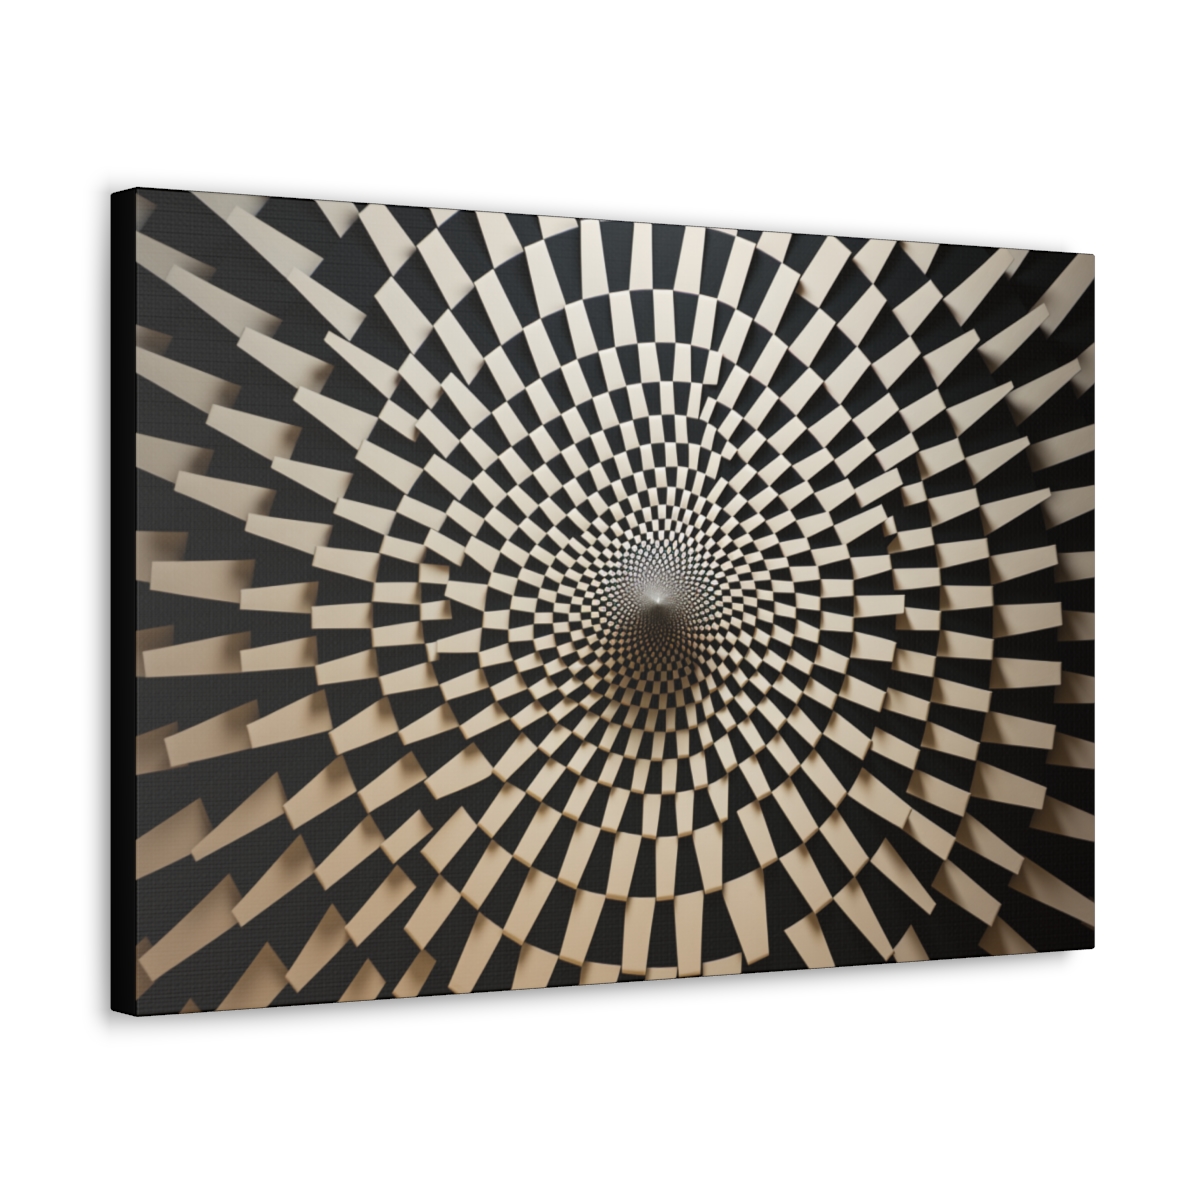 Surreal Trippy Art Canvas Print: Soul Searching